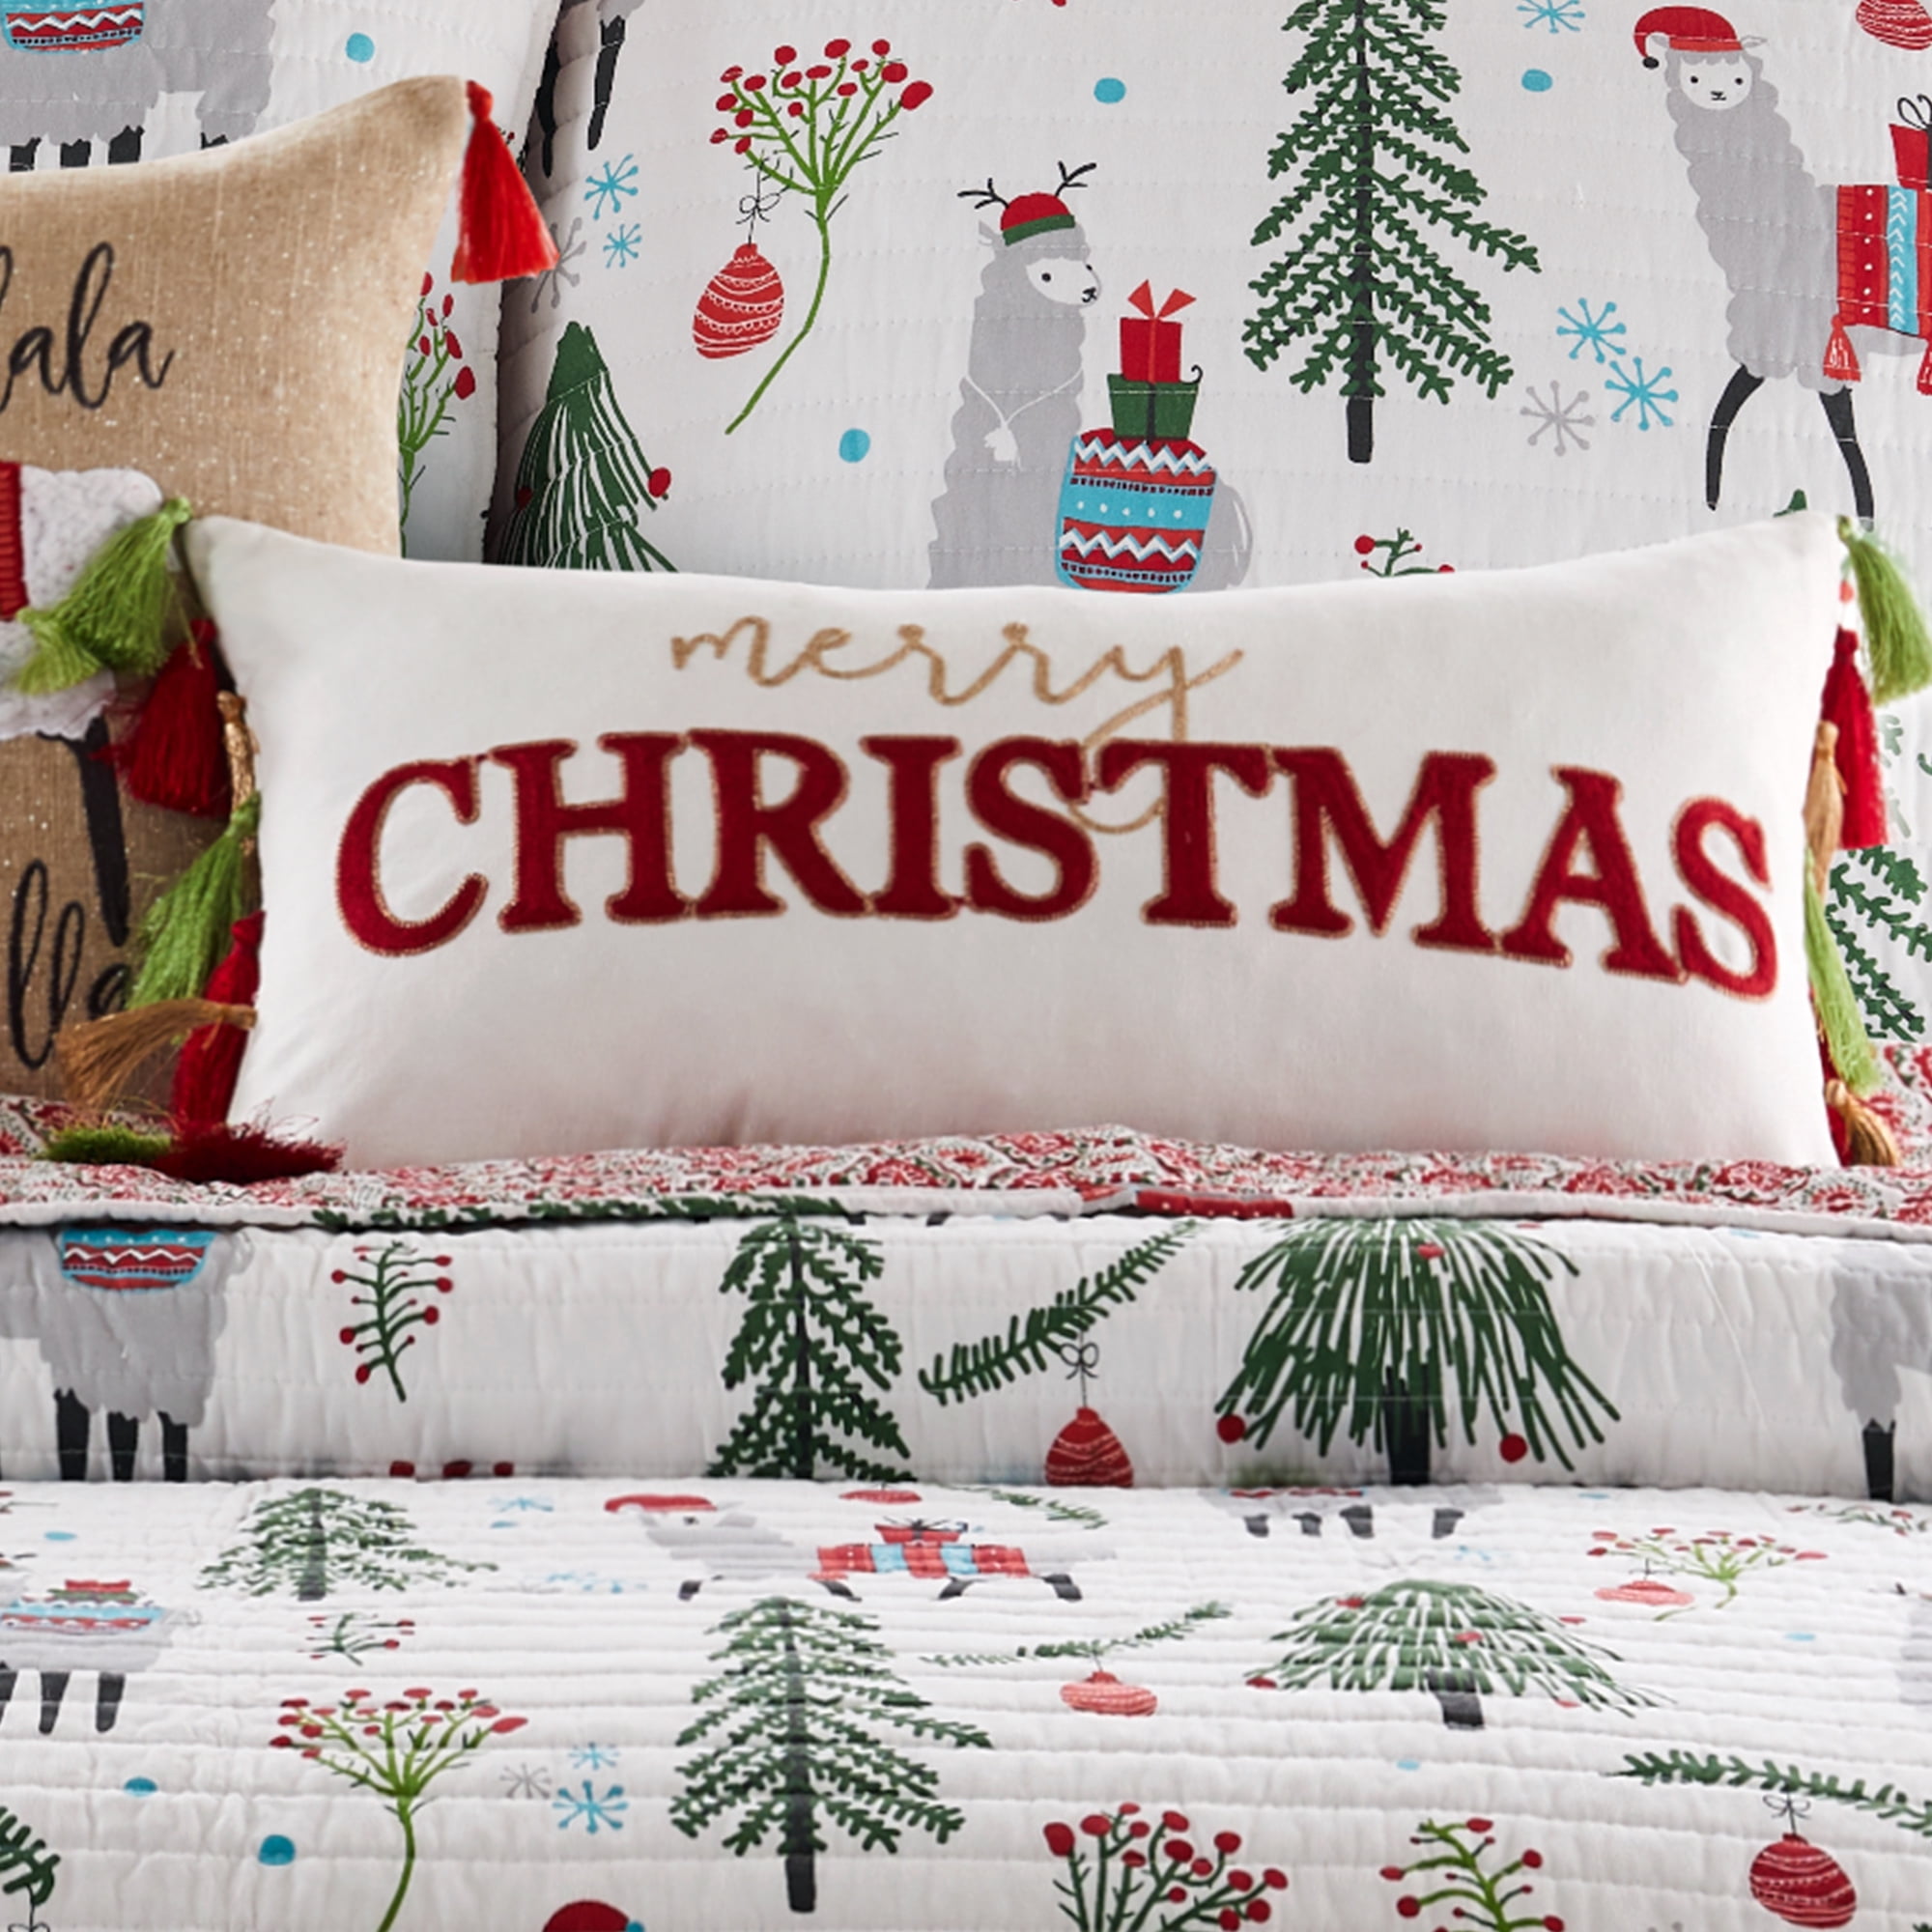 Merry & Bright by Levtex Home - Fa La La Llama Quilt Set - King Quilt  (106x92in.) + Two King Pillow Sham (20x36in.) - Red, Green, Grey, Blue, and  White - Reversible - Polyester Blend